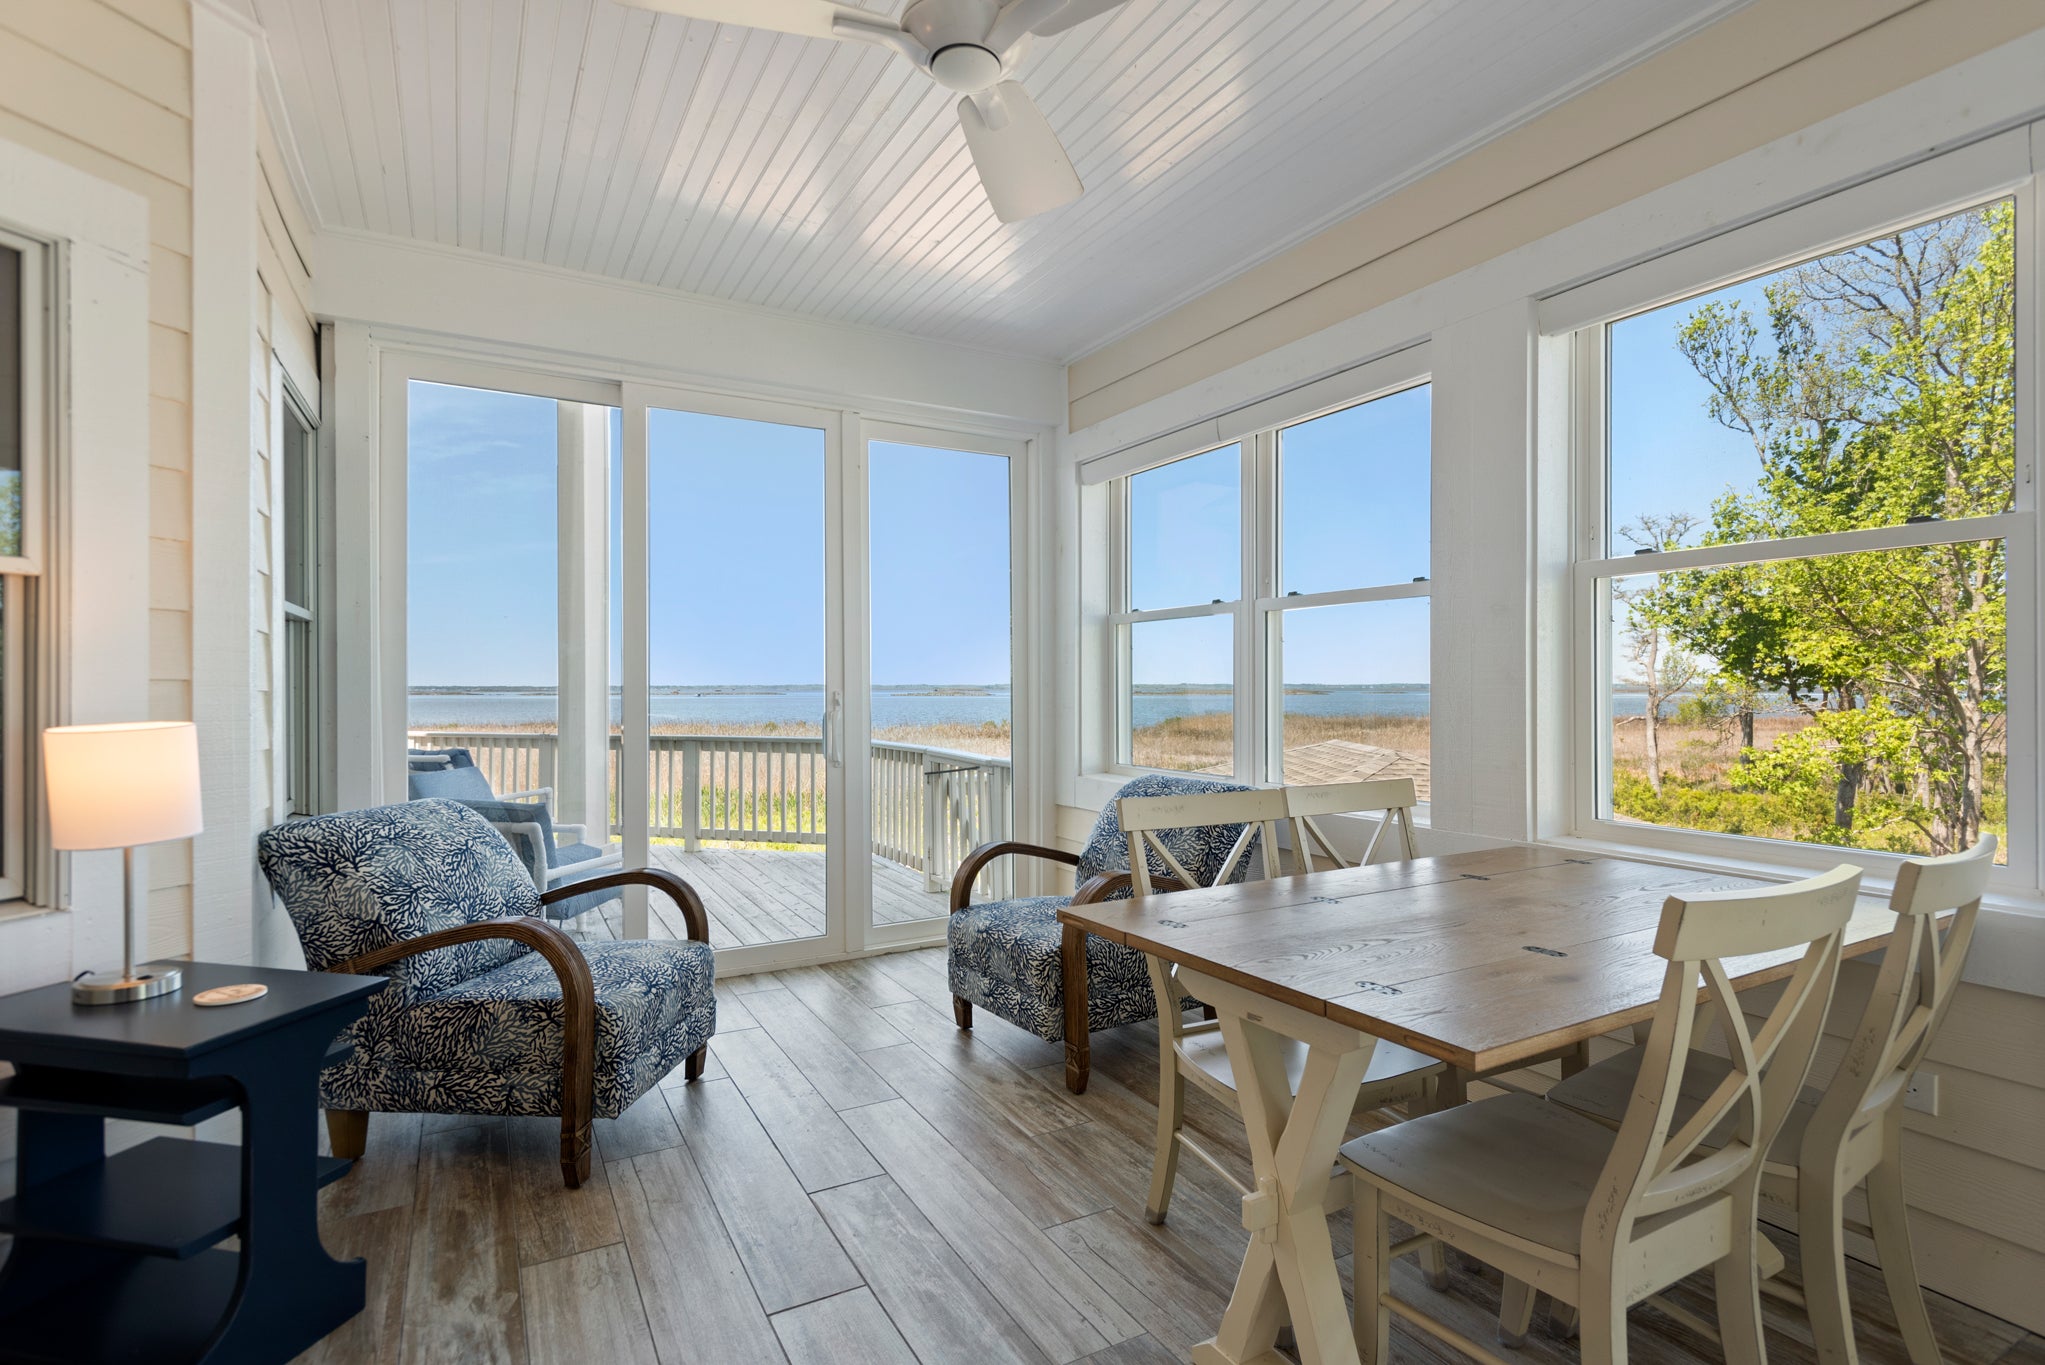 CC009: All About The View | Mid Level Sun Room